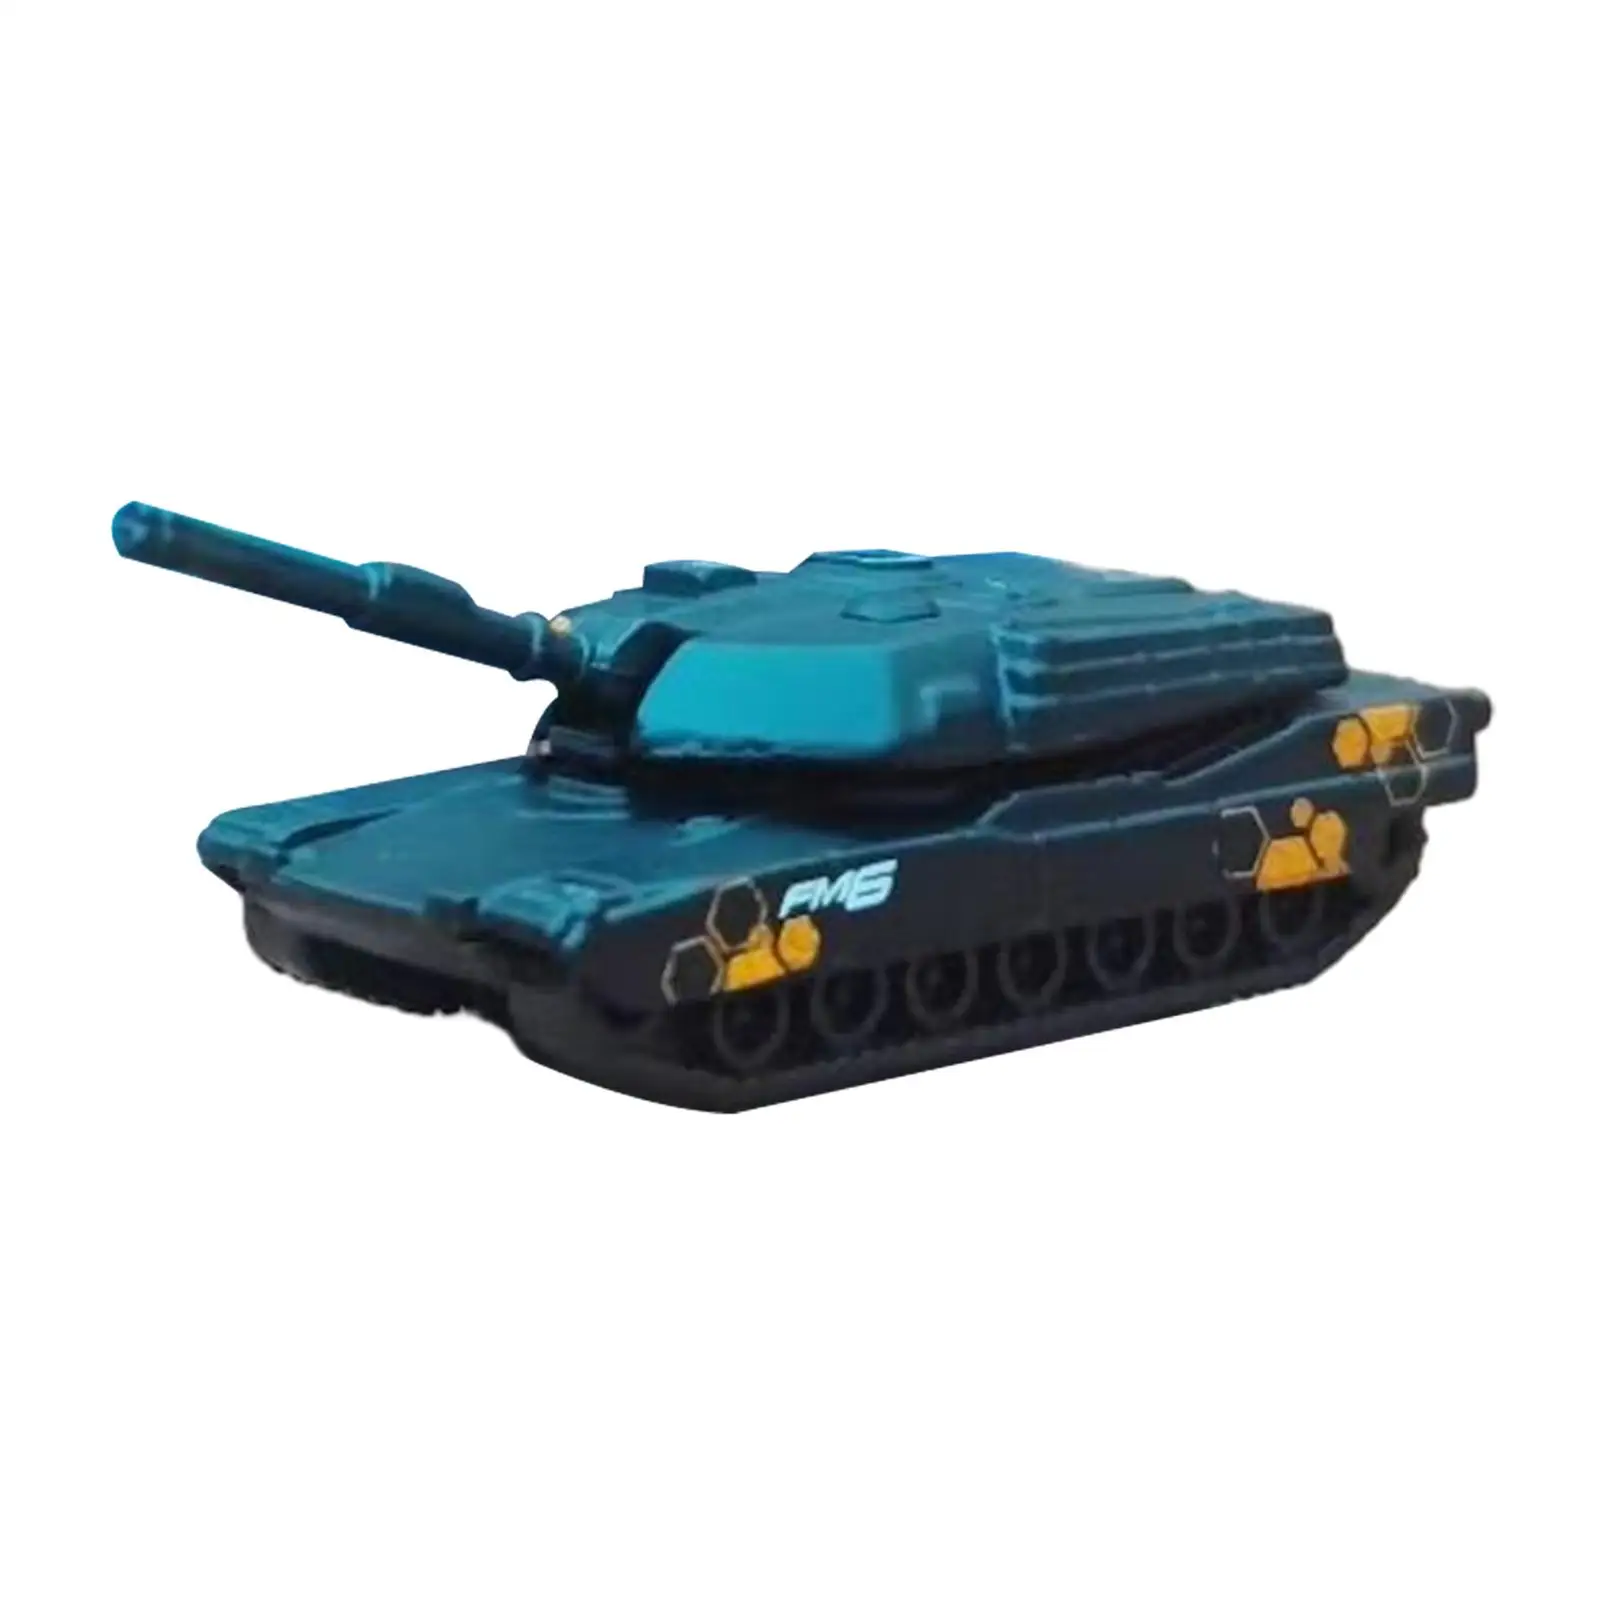 1/64 Tank Model Desk Decor Collectables for Friends Adults Birthday Gifts